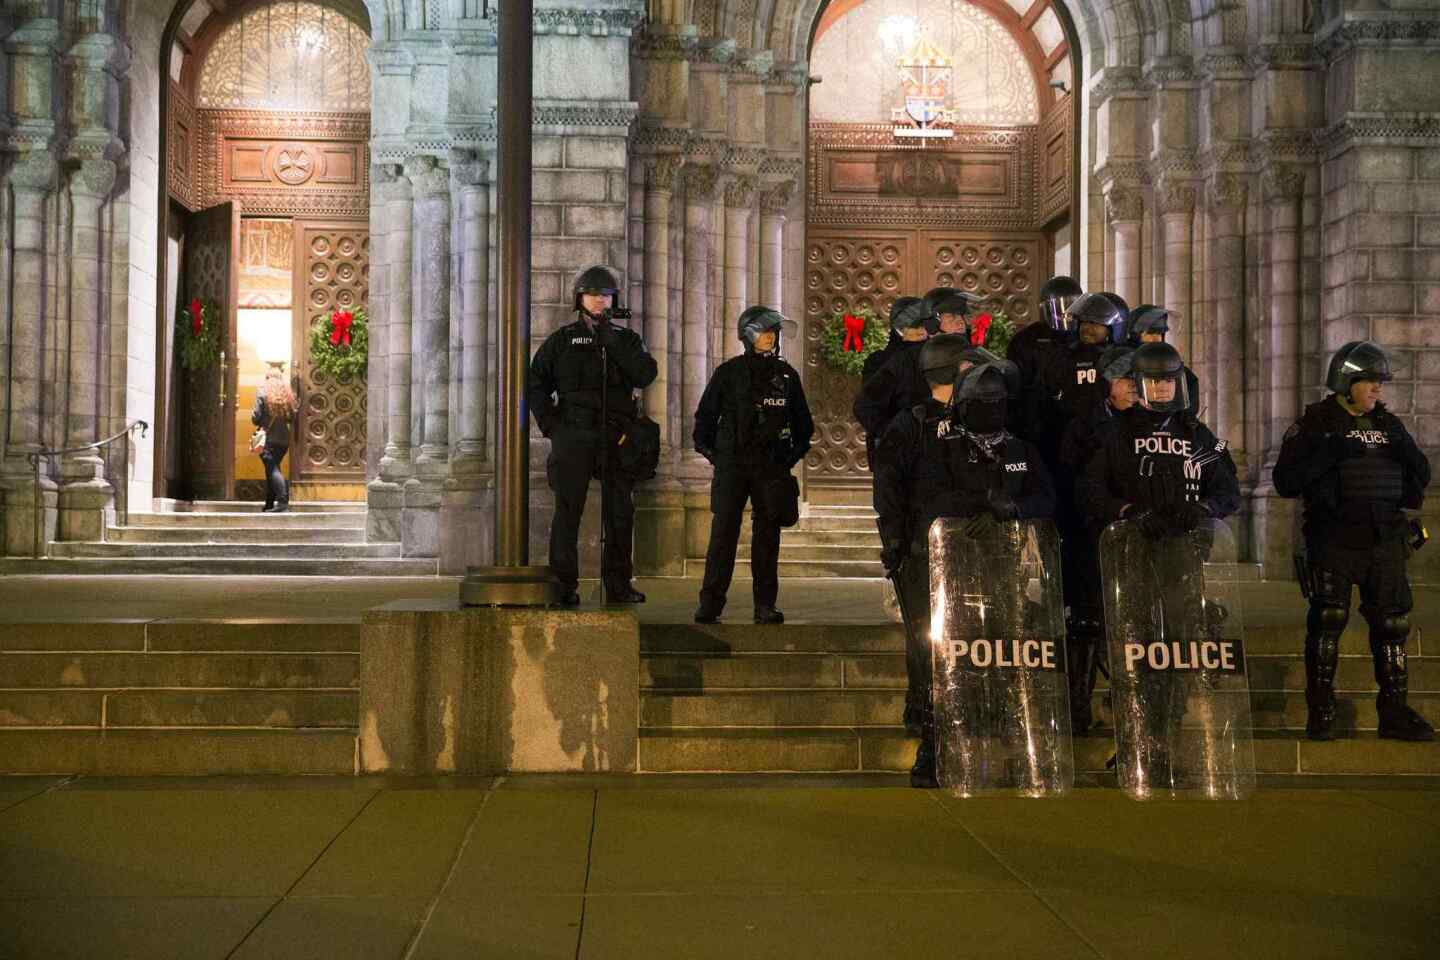 Police stand guard during a protest at Cathedral Basilica in St. Louis, Missouri on December 25, 2014, days after a man was fatally shot at a suburban gas station by a police officer.